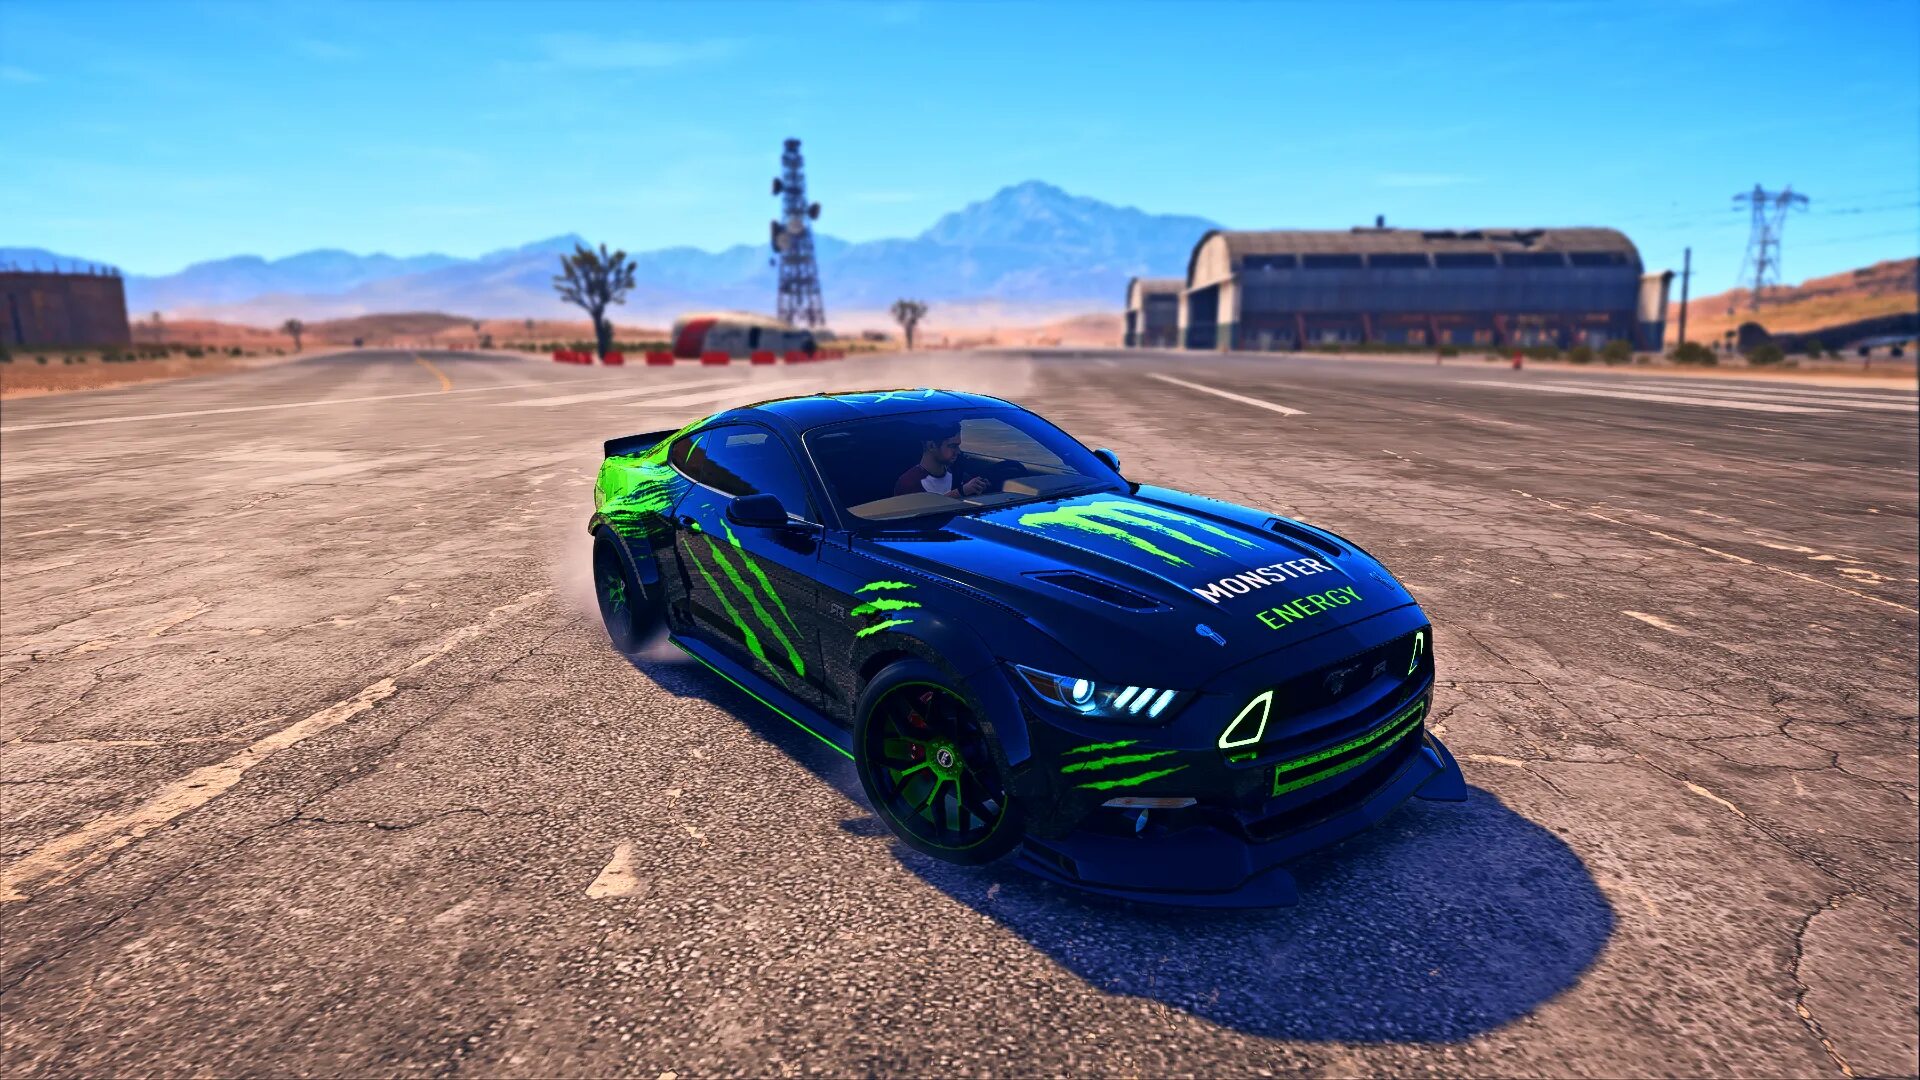 Мустанг payback. Ford Mustang NFS Payback. Ford Mustang gt Monster Energy. Ford Mustang Payback. NFS Payback Мустанг.